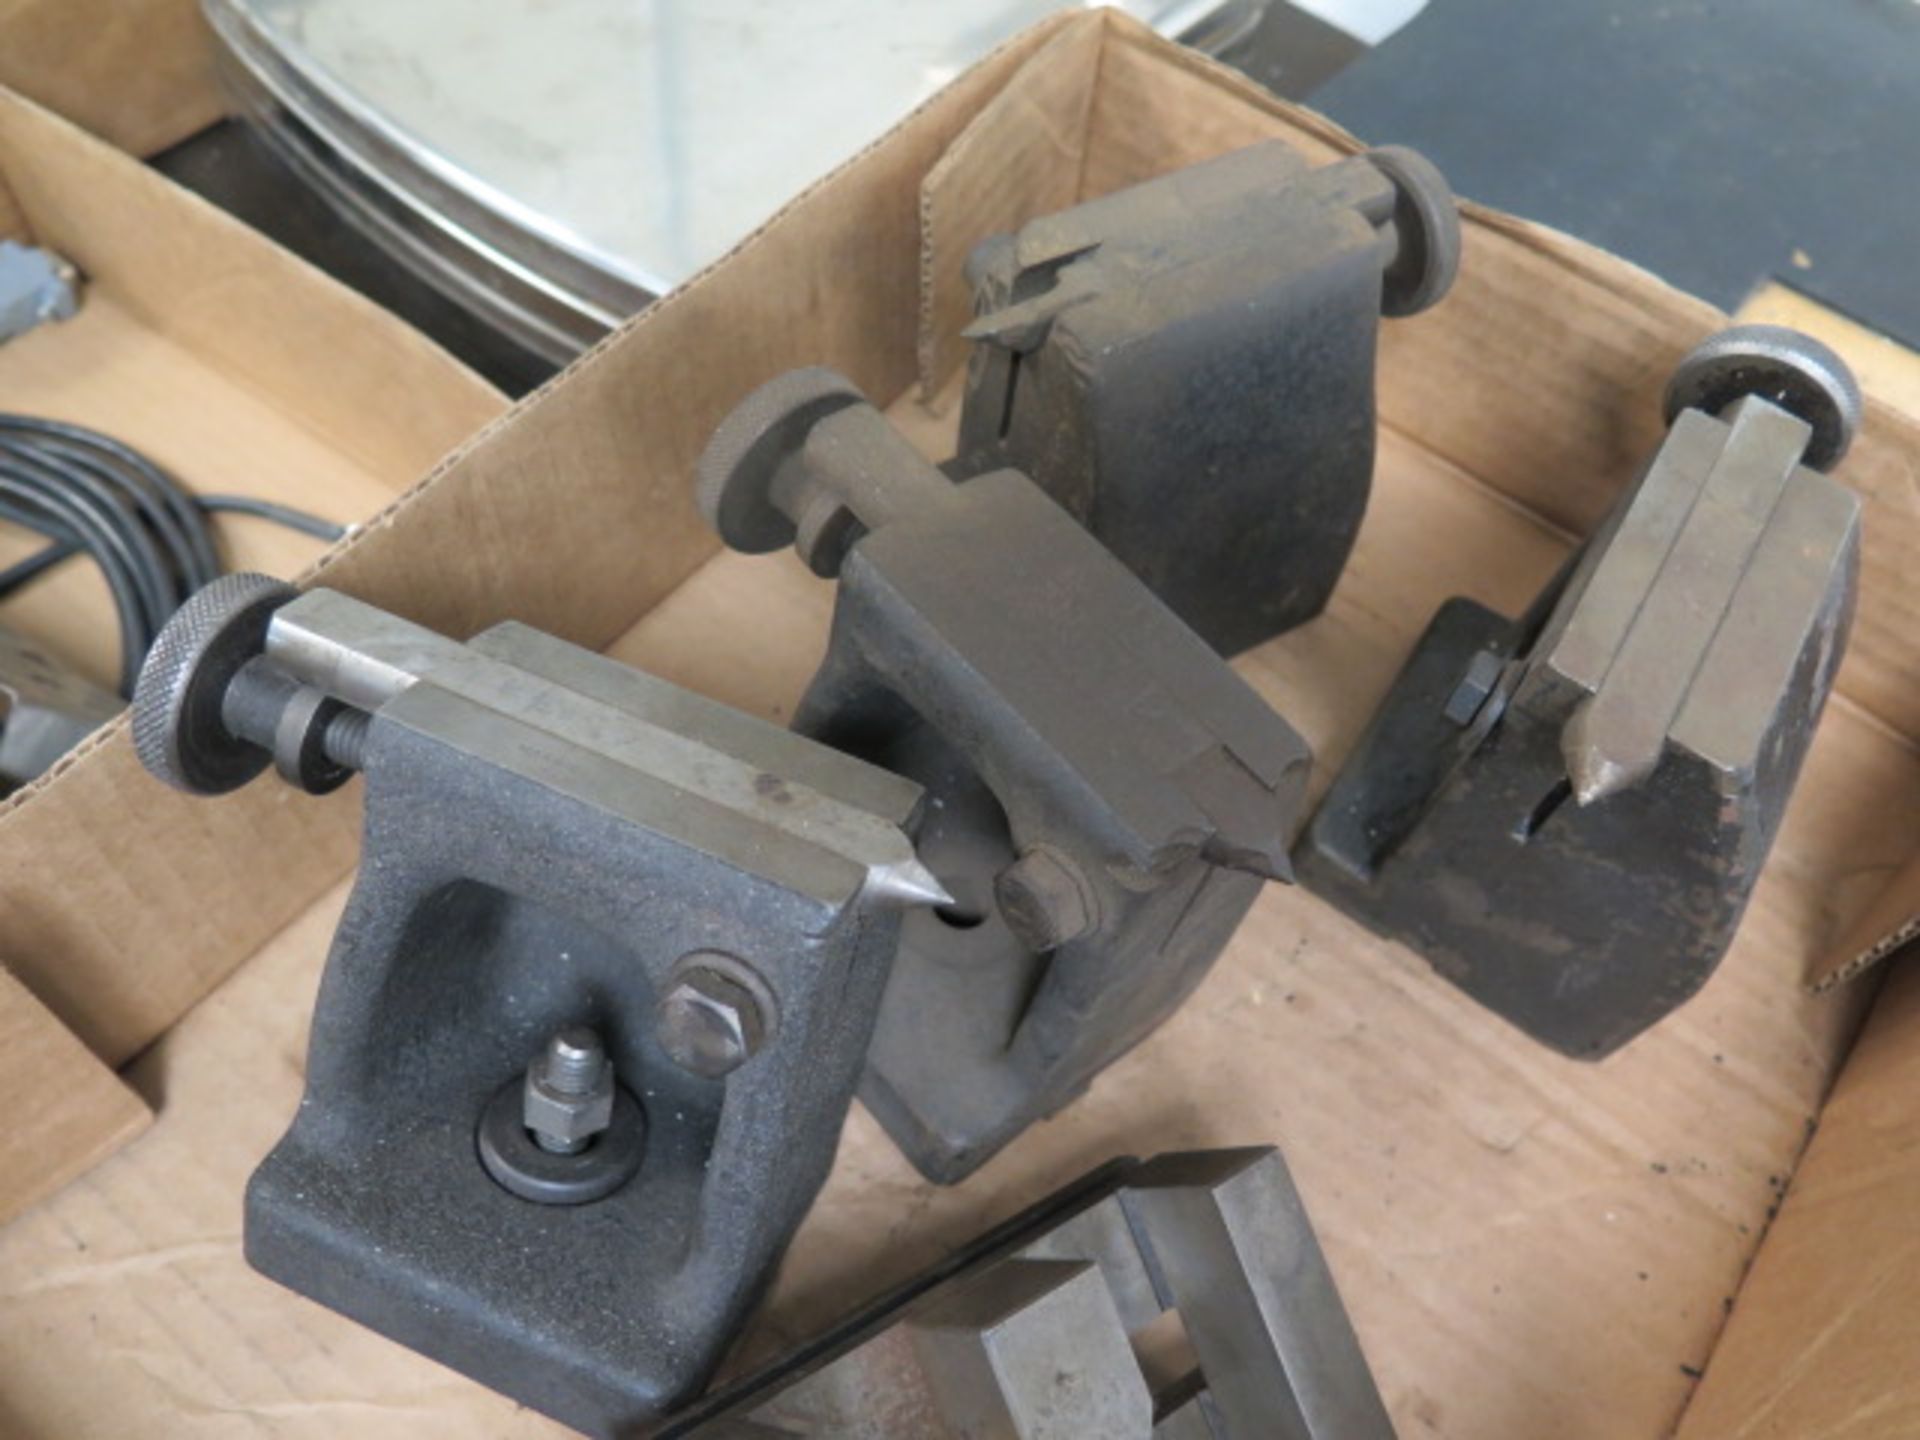 Mill Centers (4) and 2 3/8" Machine Vise (SOLD AS-IS - NO WARRANTY) - Image 4 of 4